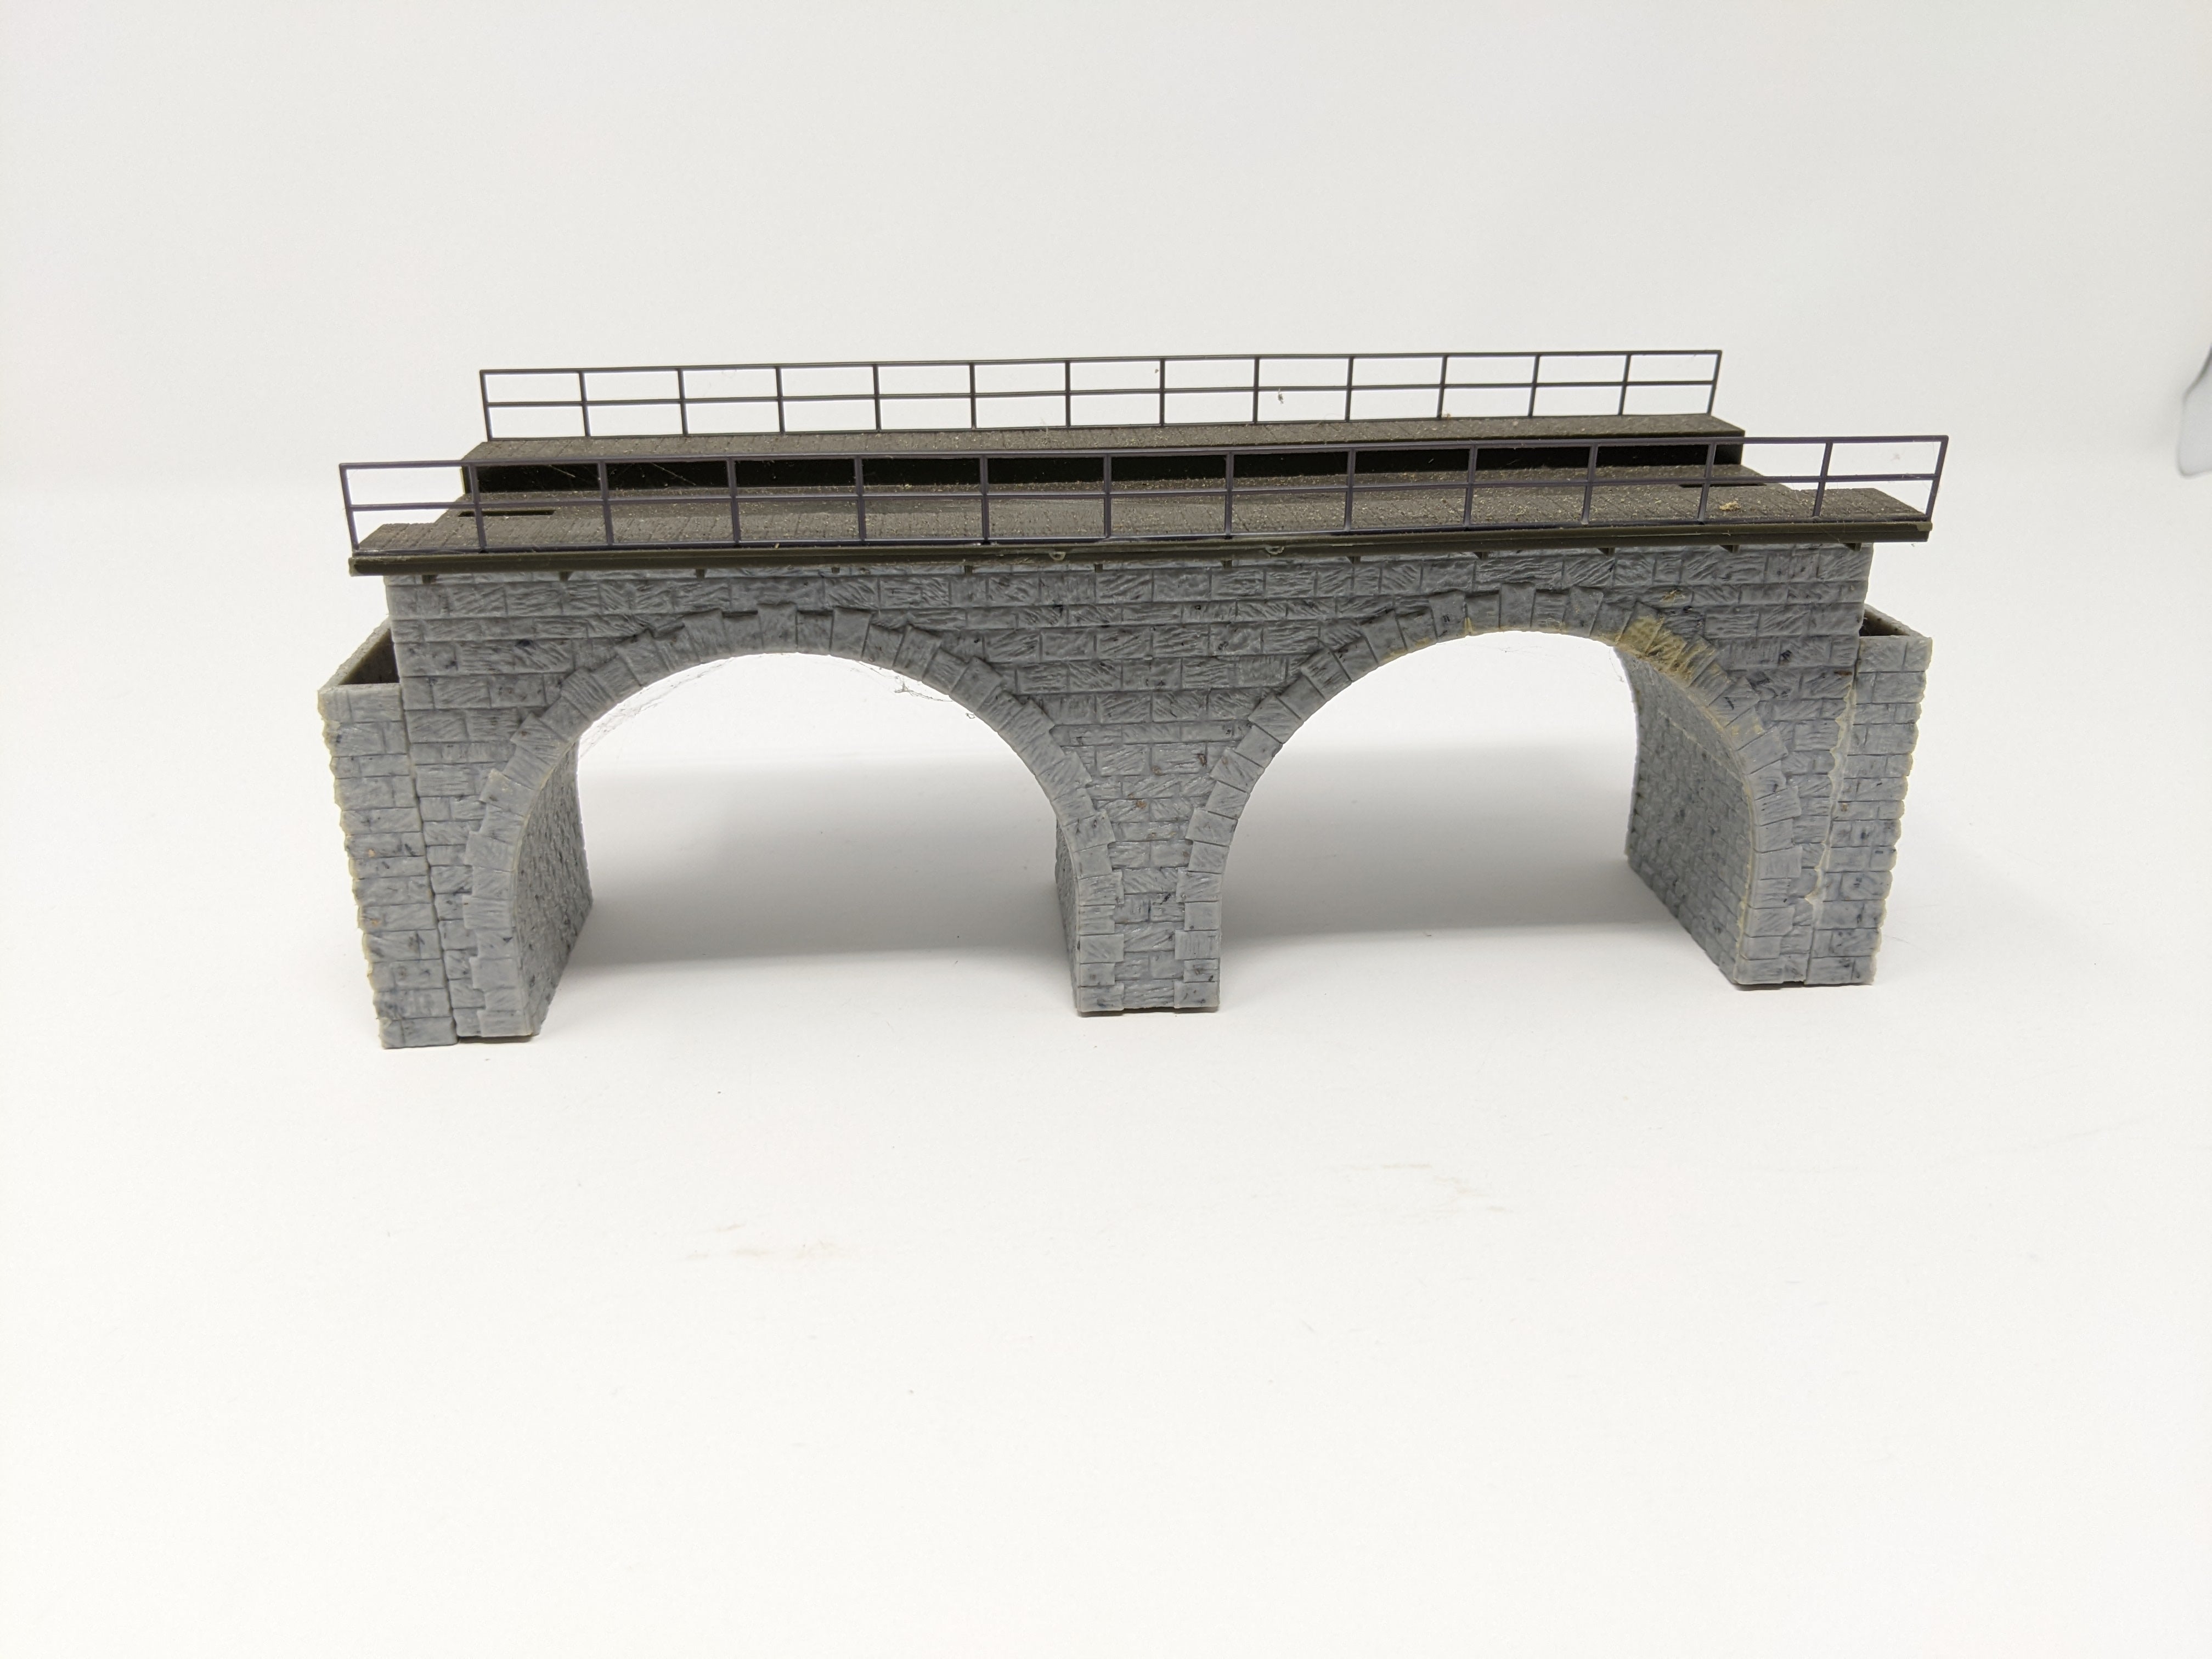 USED HO Scale, Cut Stone Viaduct Bridge Top Section - Straight